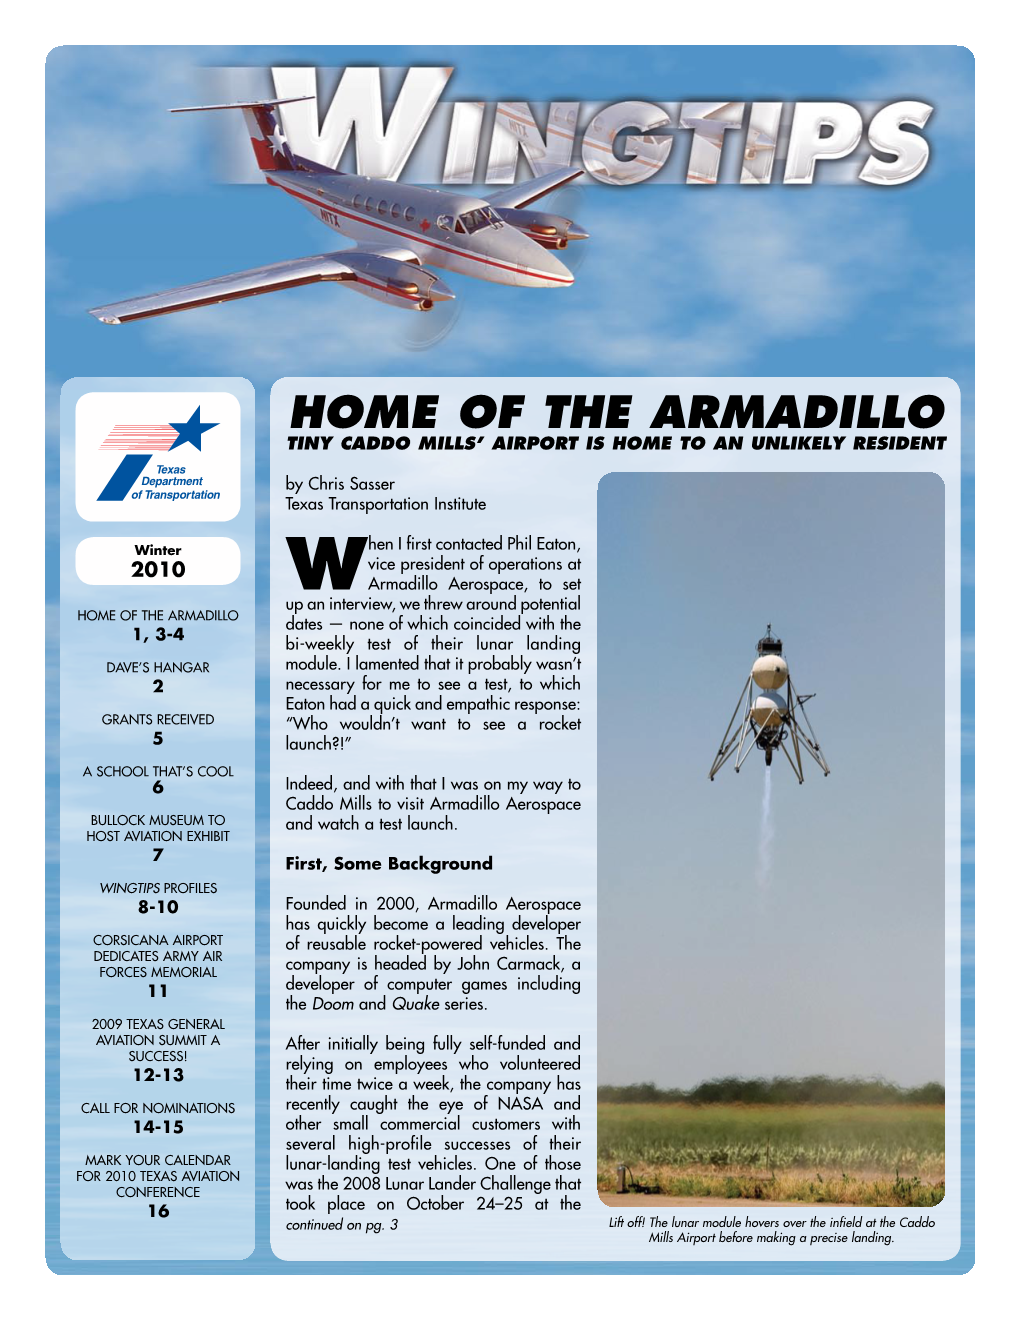 Home of the Armadillo Tiny Caddo Mills’ Airport Is Home to an Unlikely Resident